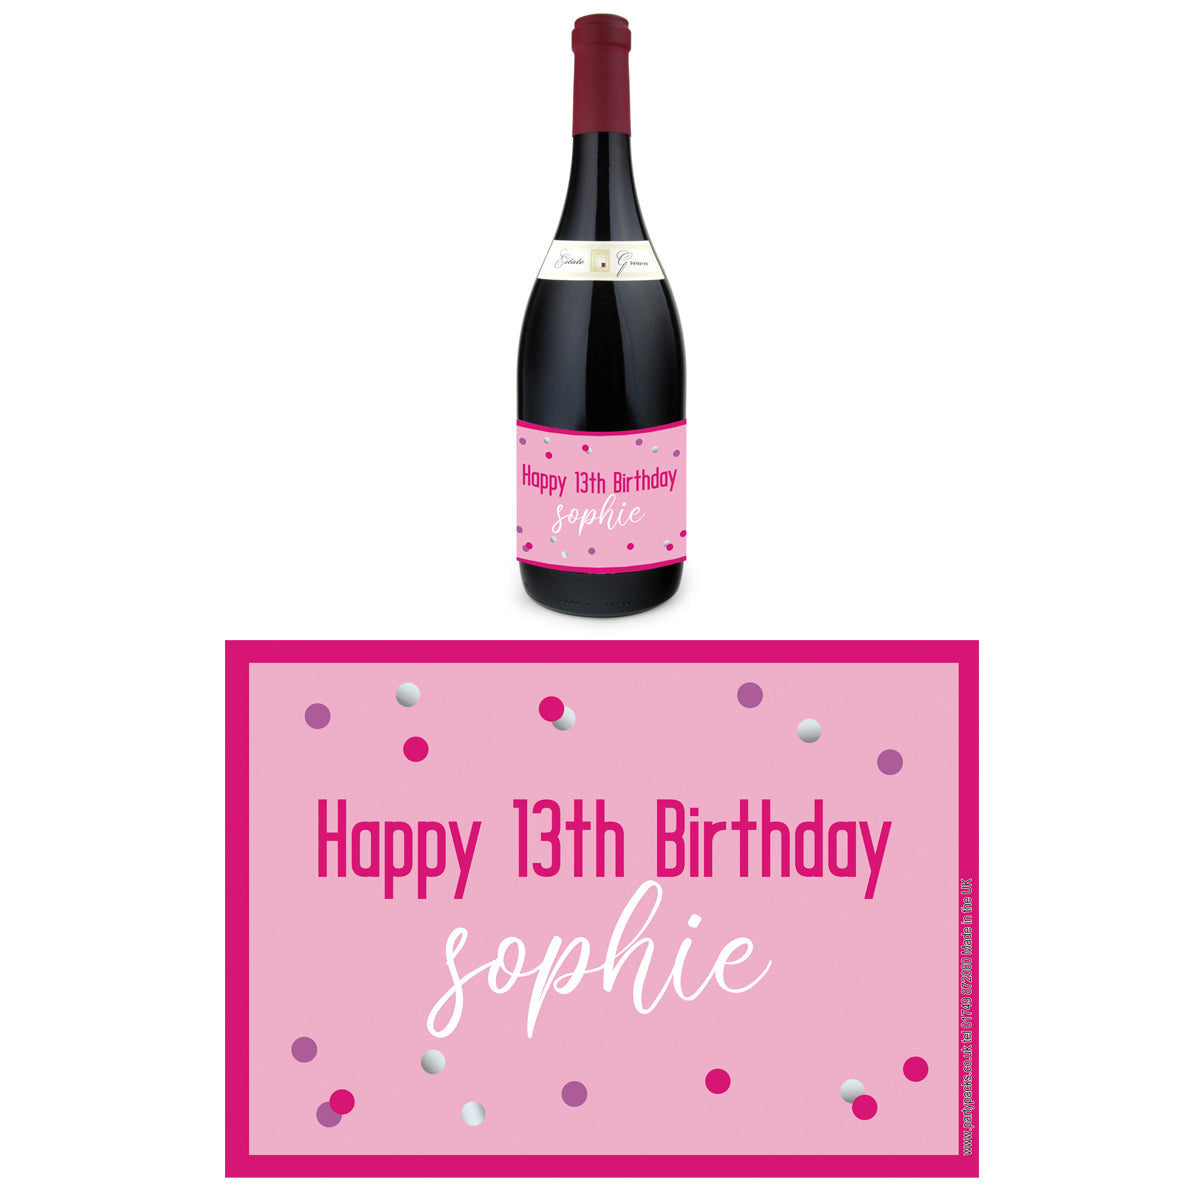 Personalised Wine Bottle Labels - Glitz Pink - Pack of 4